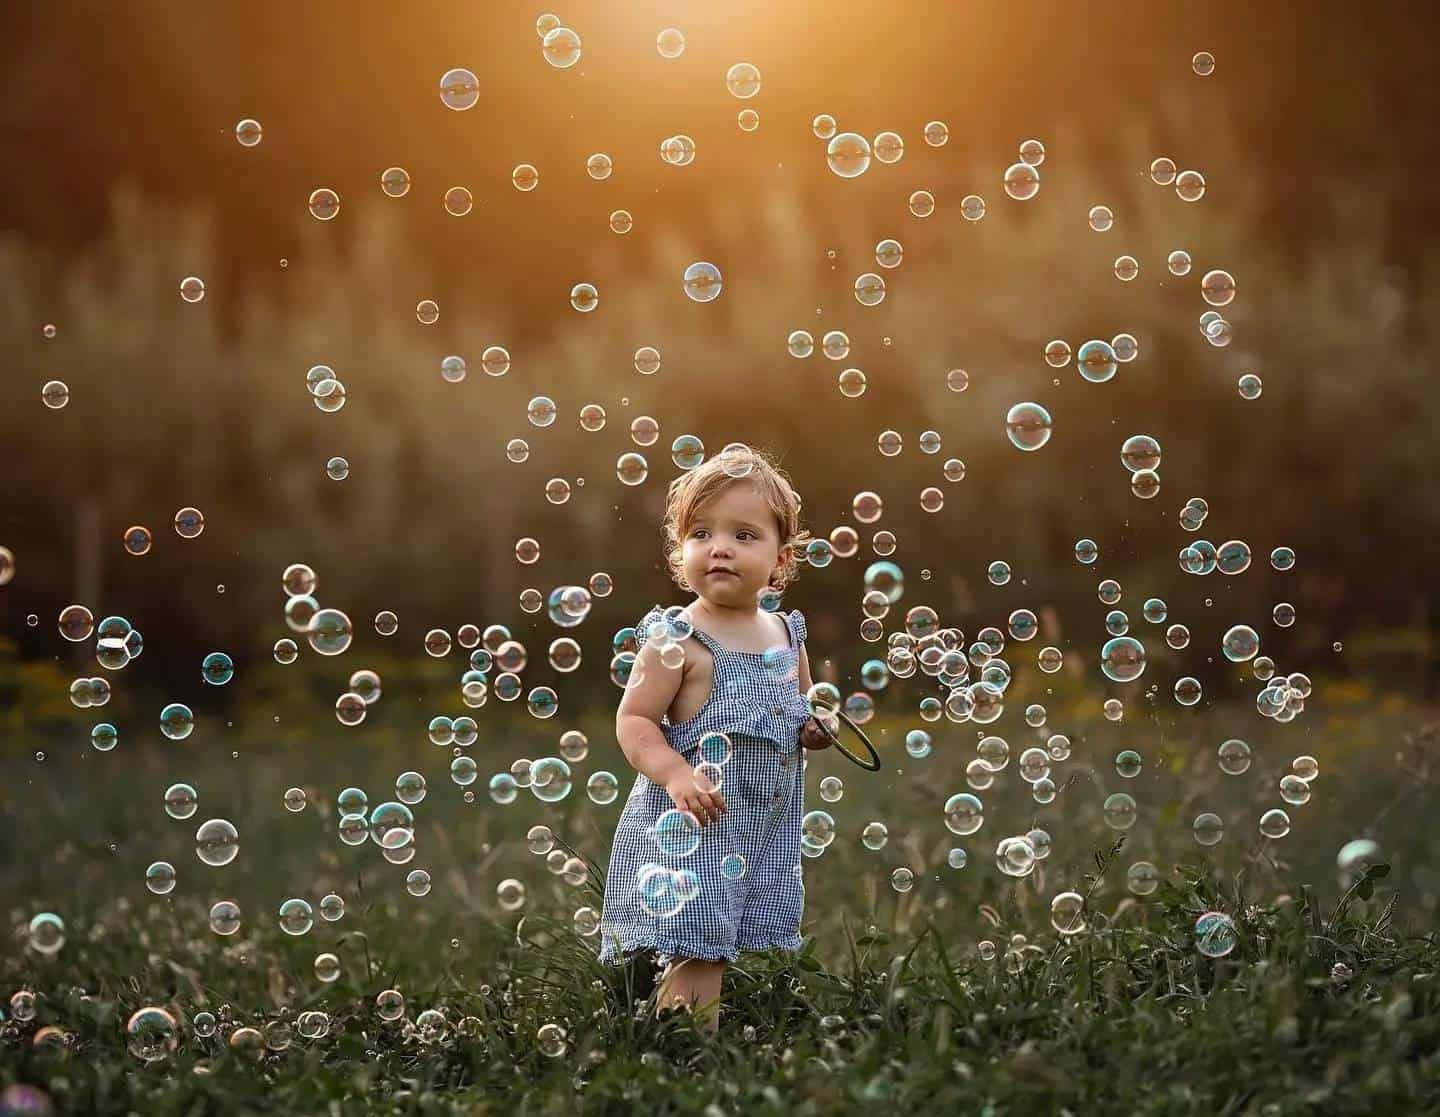 Bubbles with Kids: Best Bubble Recipes, Games, Activities, Books & More